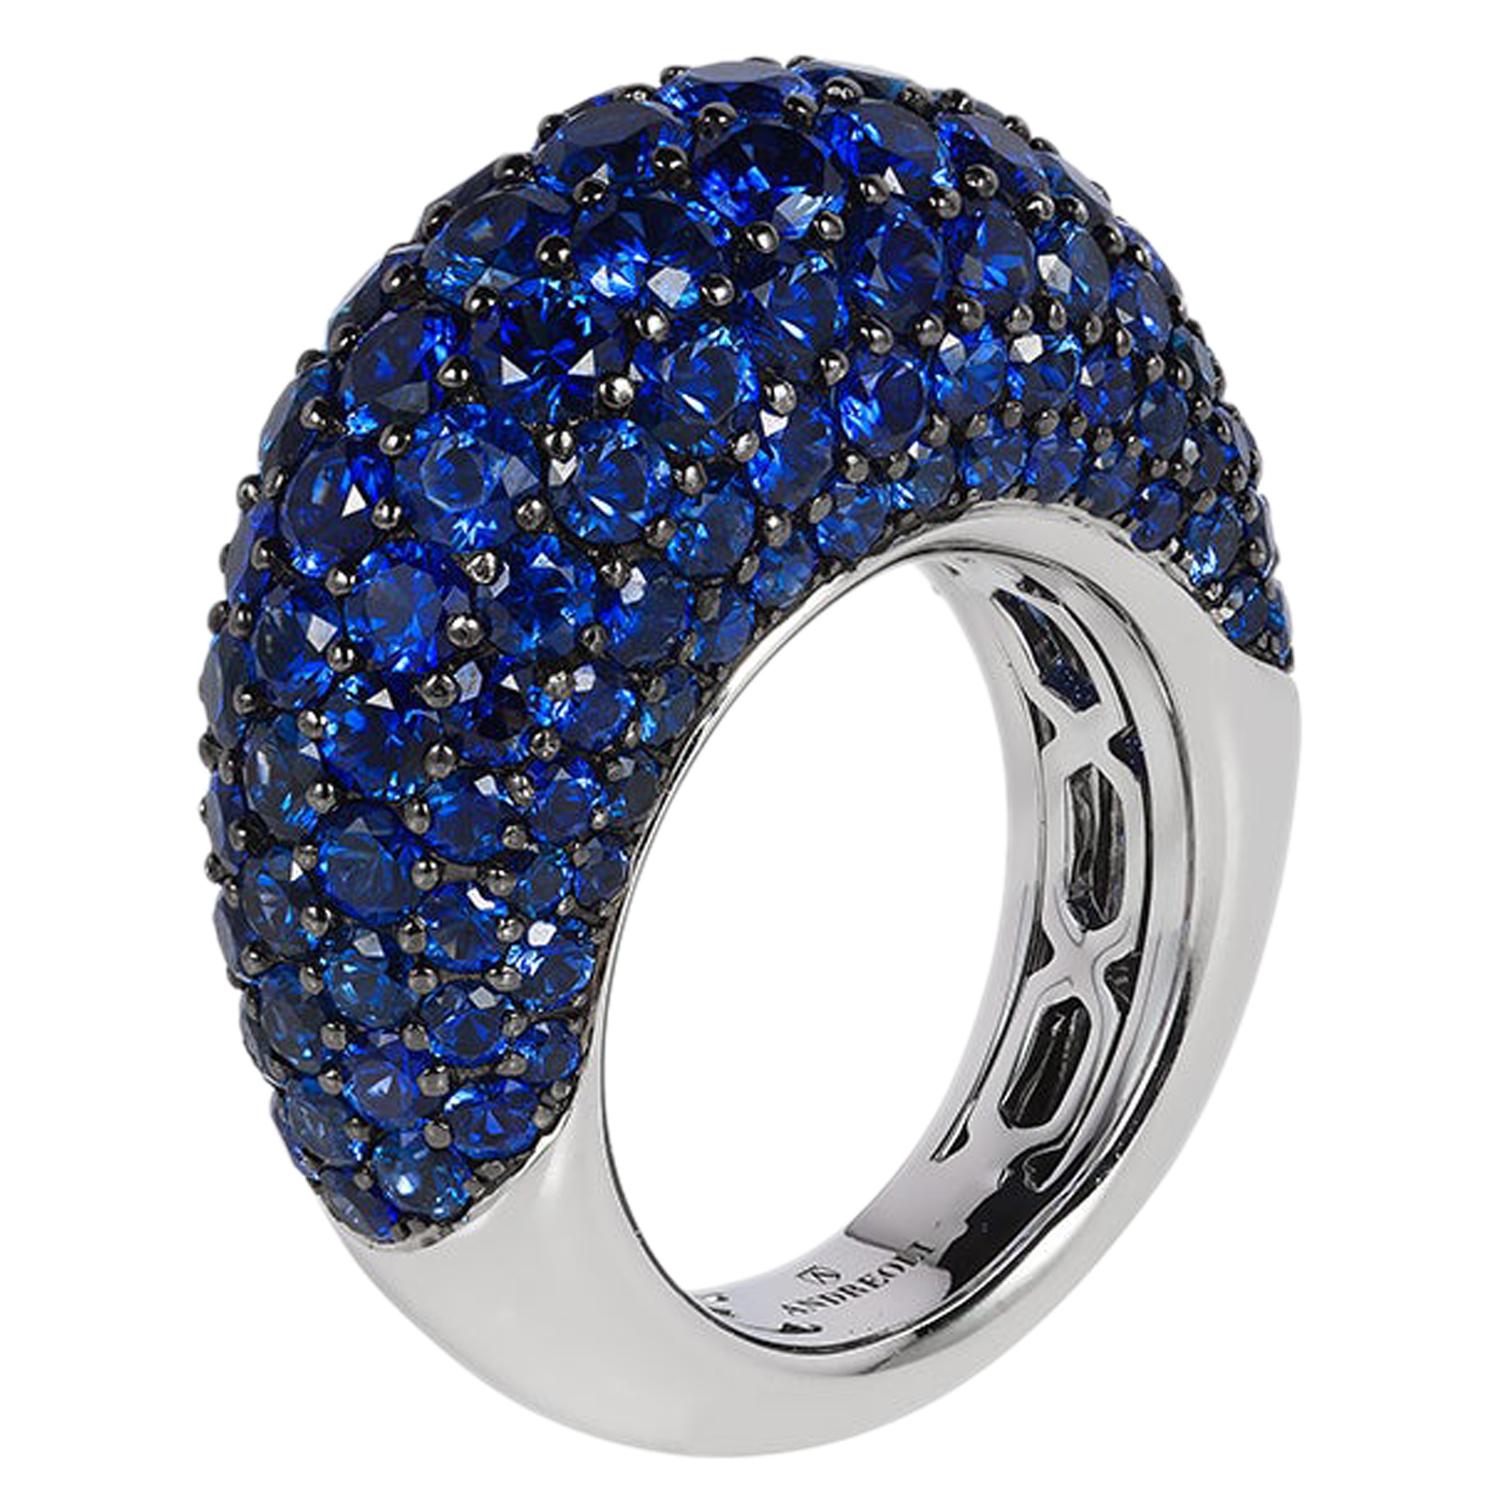 Blue Sapphire Dome Ring Cocktail 18 Karat White Gold Andreoli